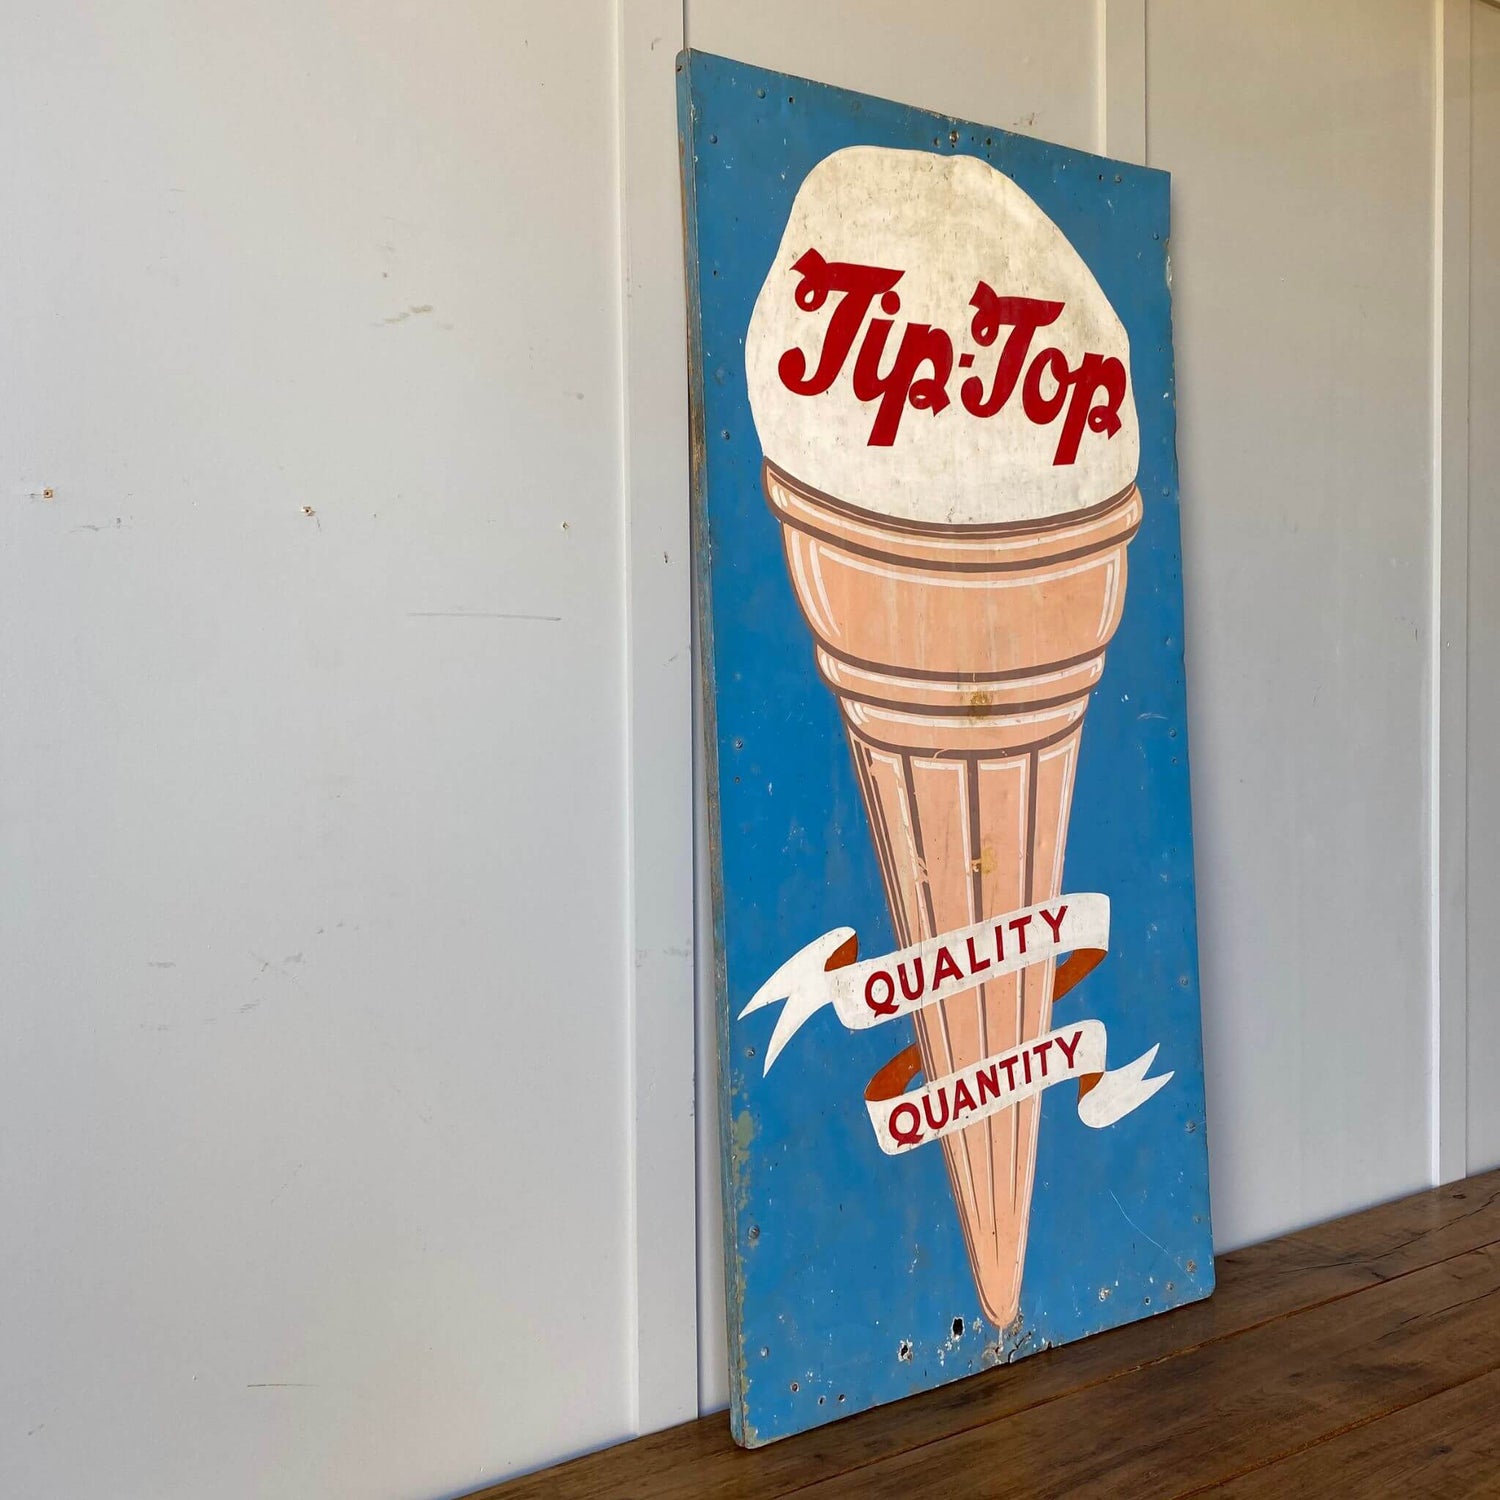 Vintage advertising collectable sign